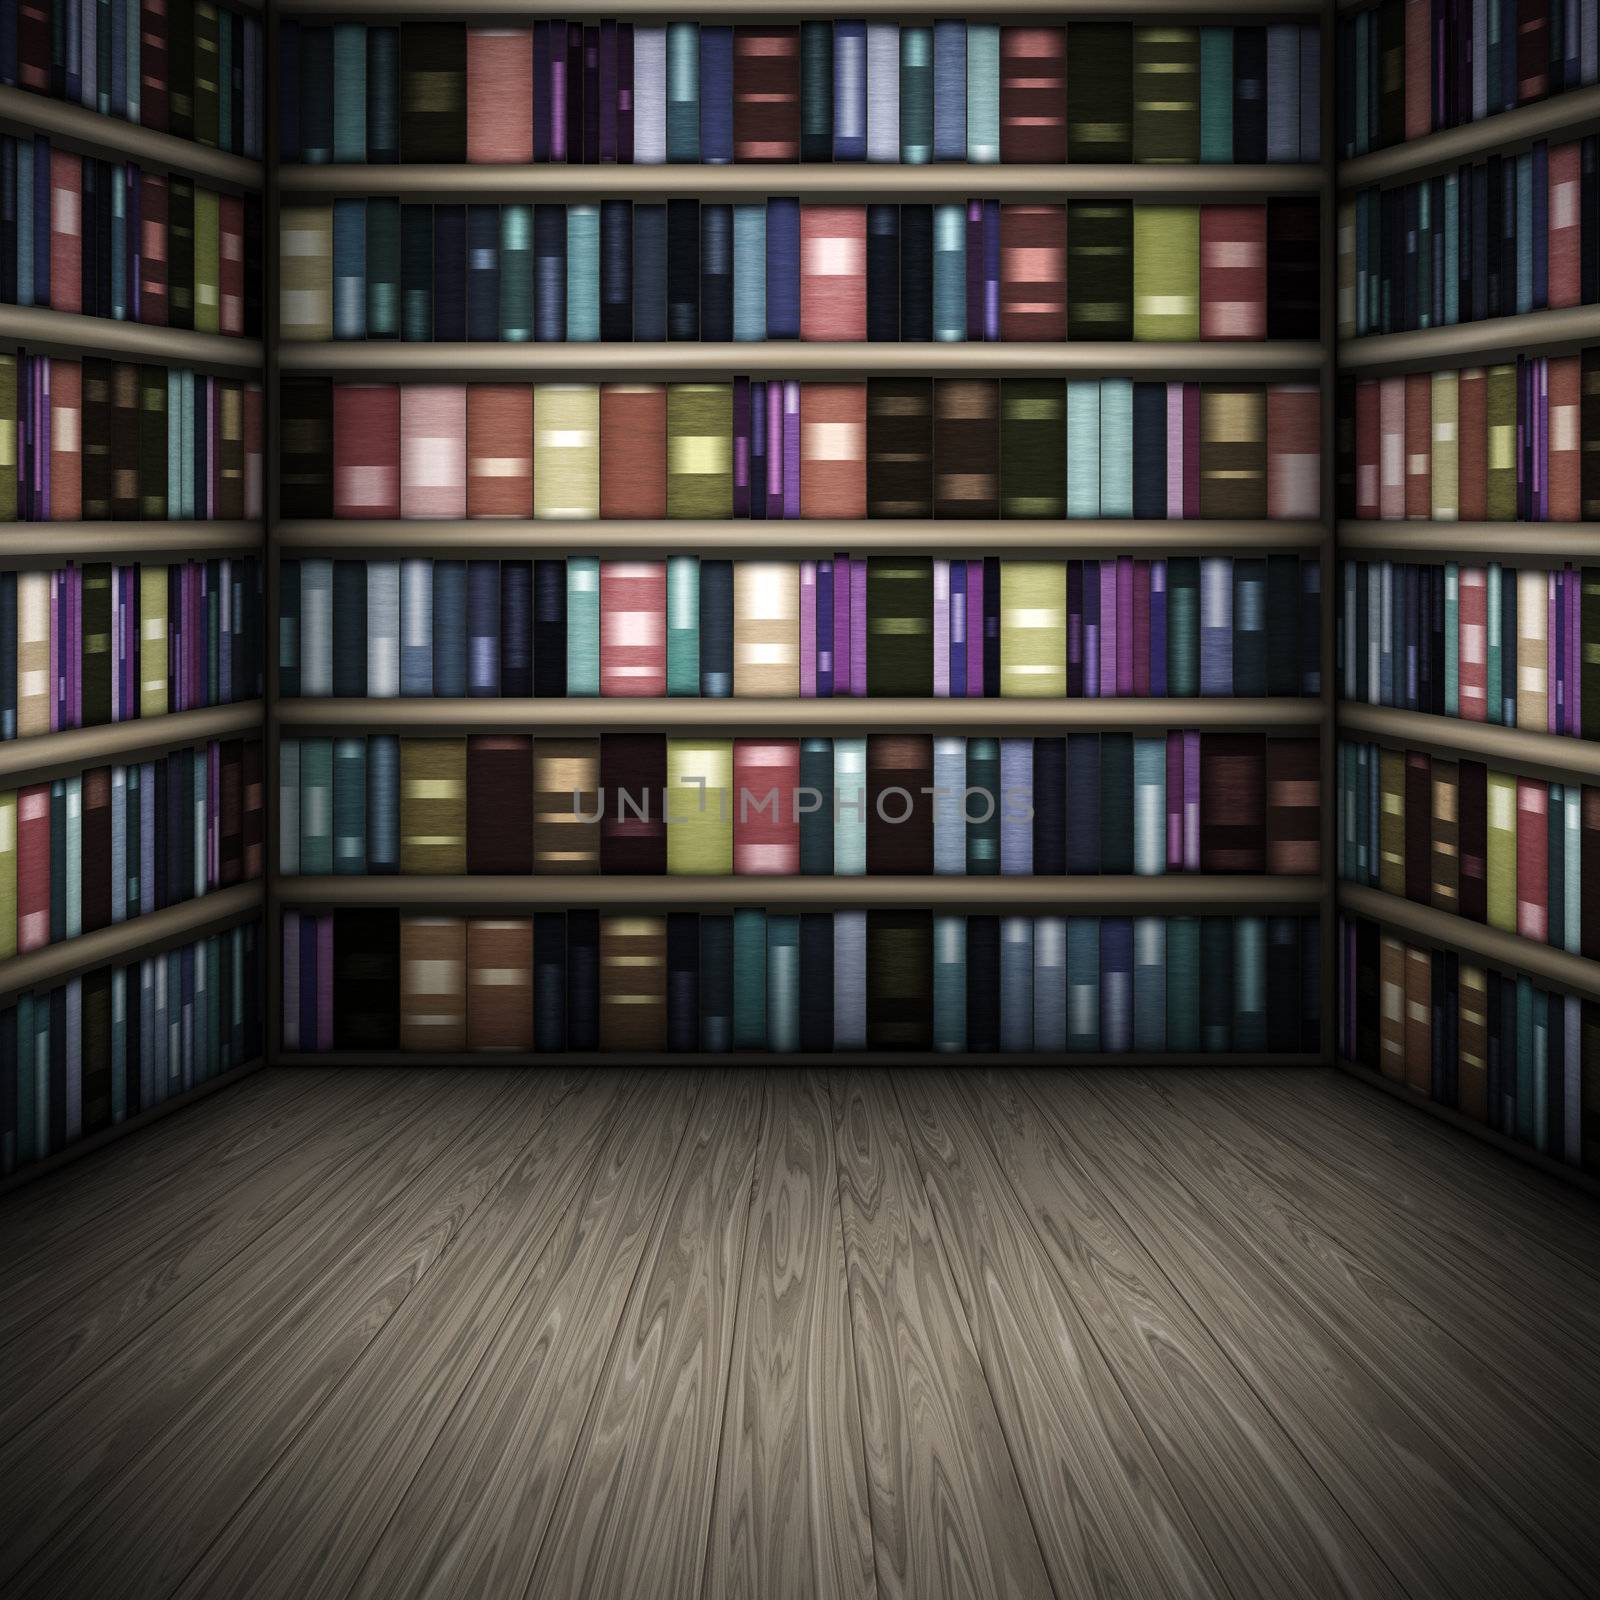 An image of a nice library background